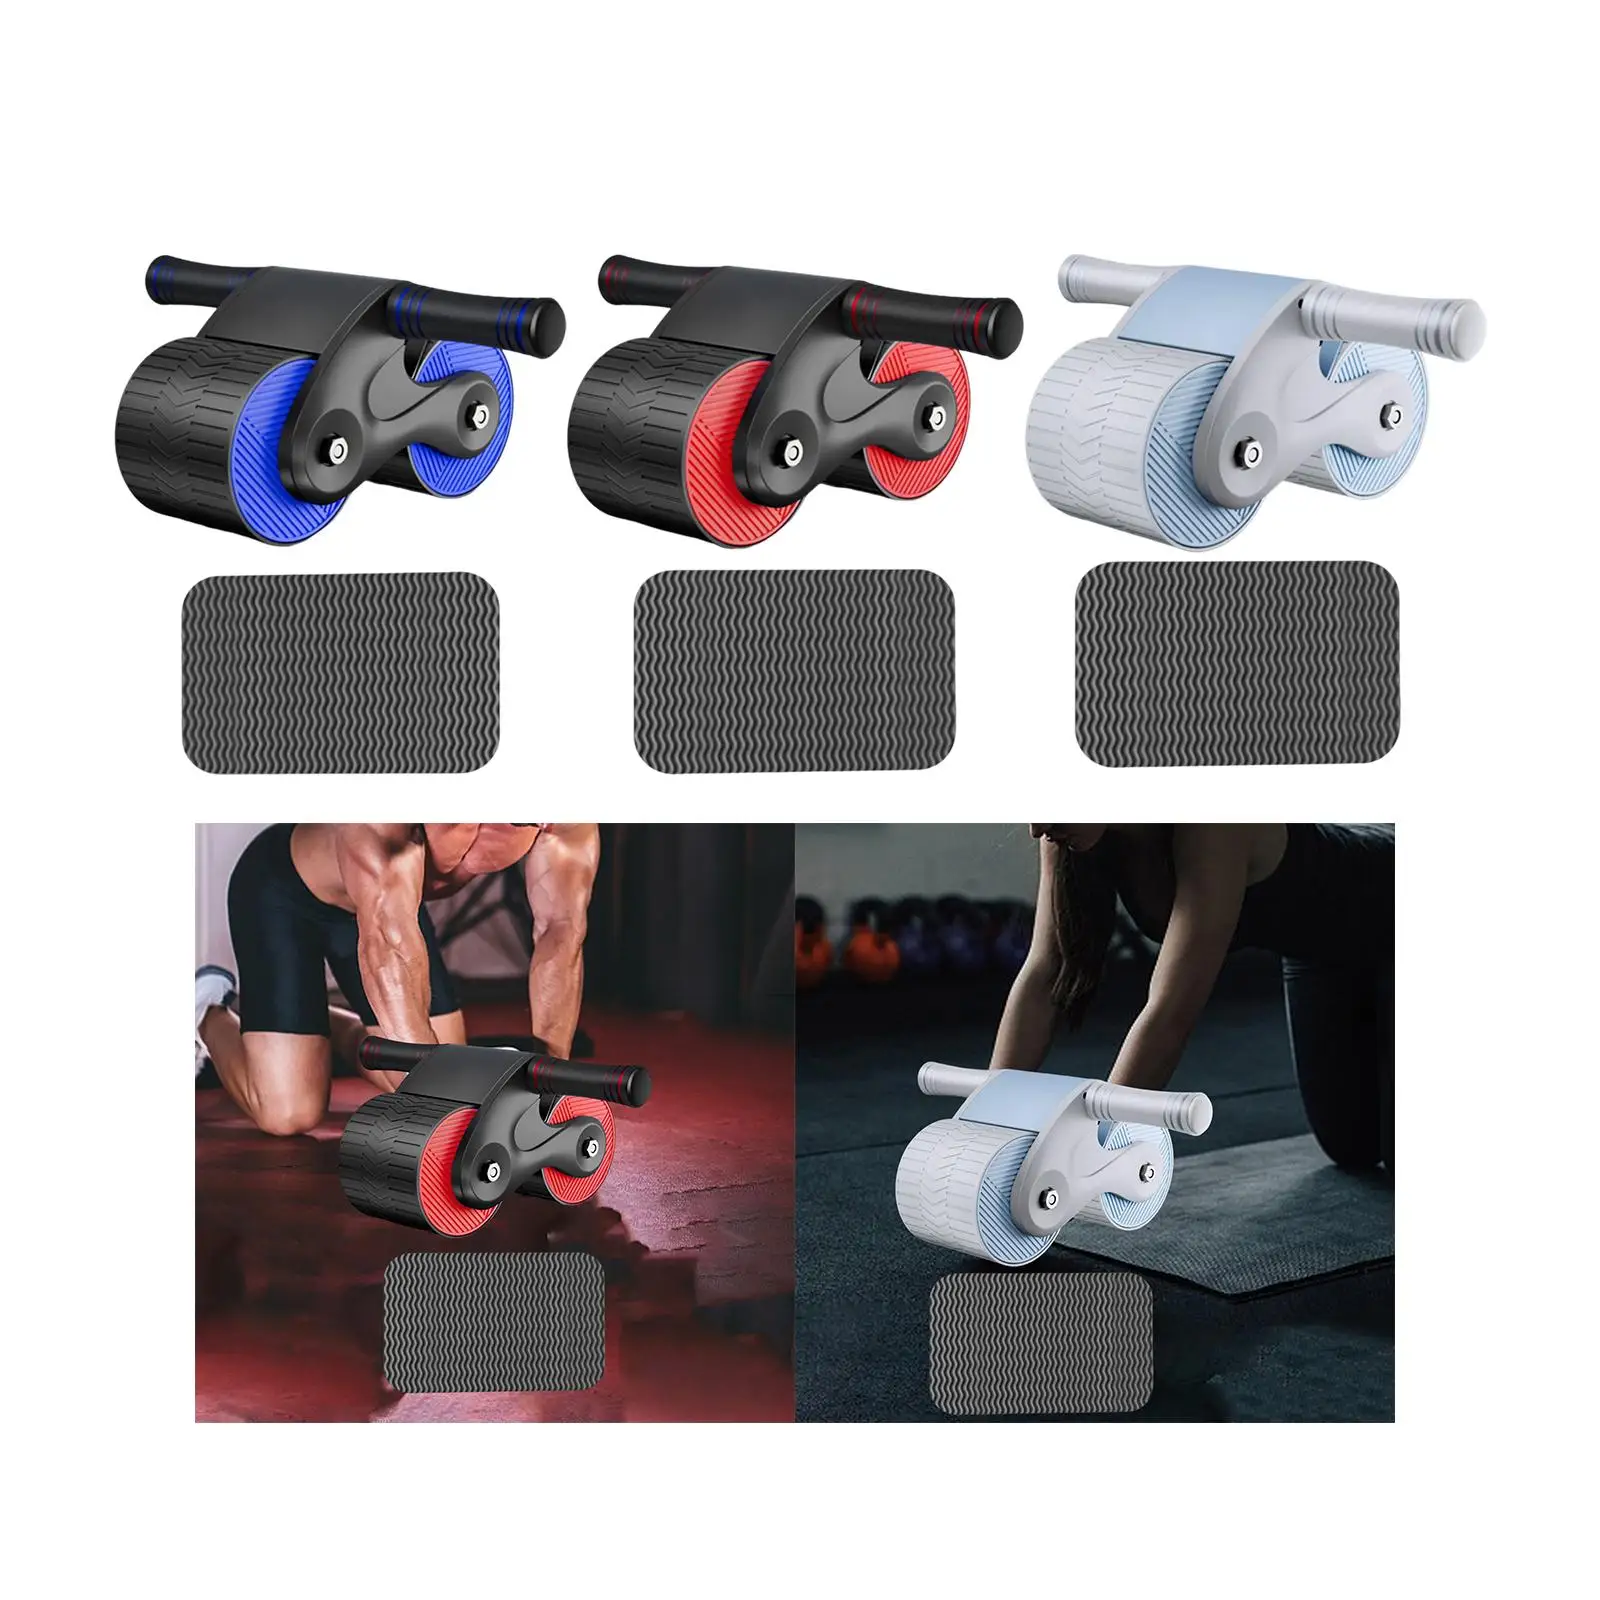 Non Slip Ab Roller Wheel Silent Training Workout Widen Abdominal Exerciser for Shoulders Arms Thigh Legs Training Body Building